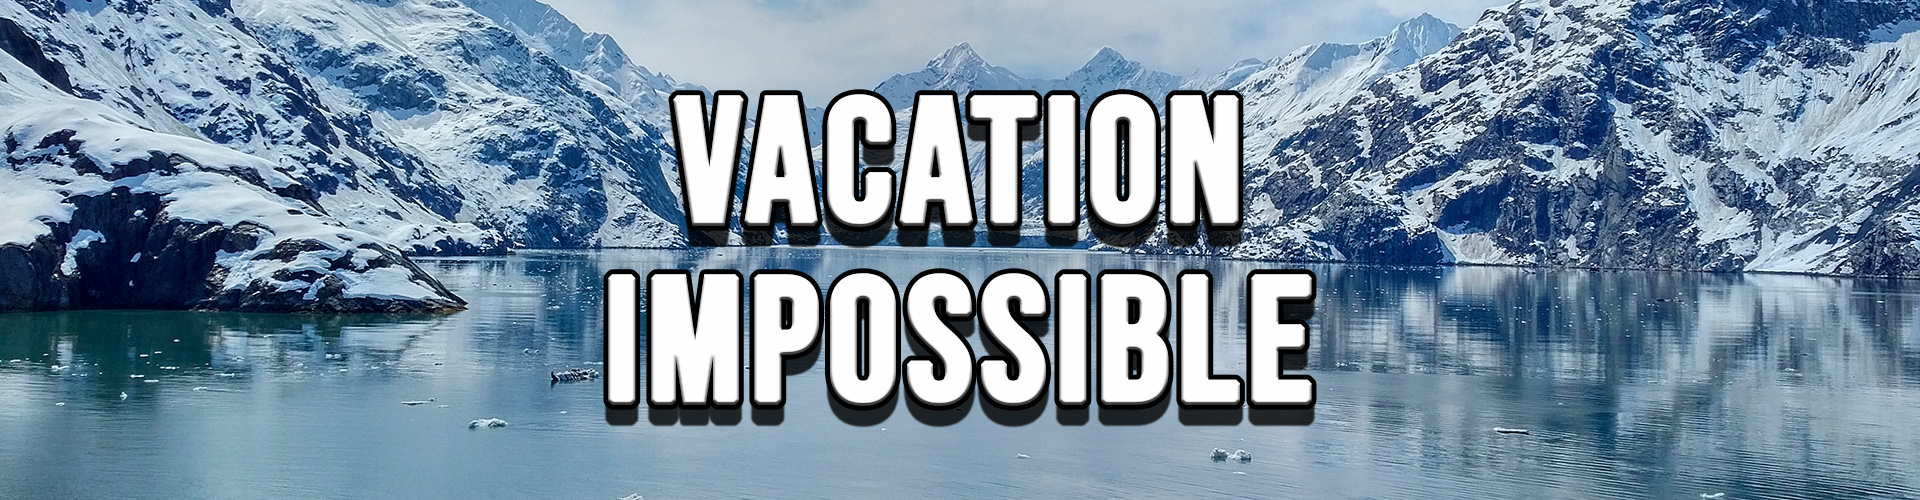 Vacation Impossible